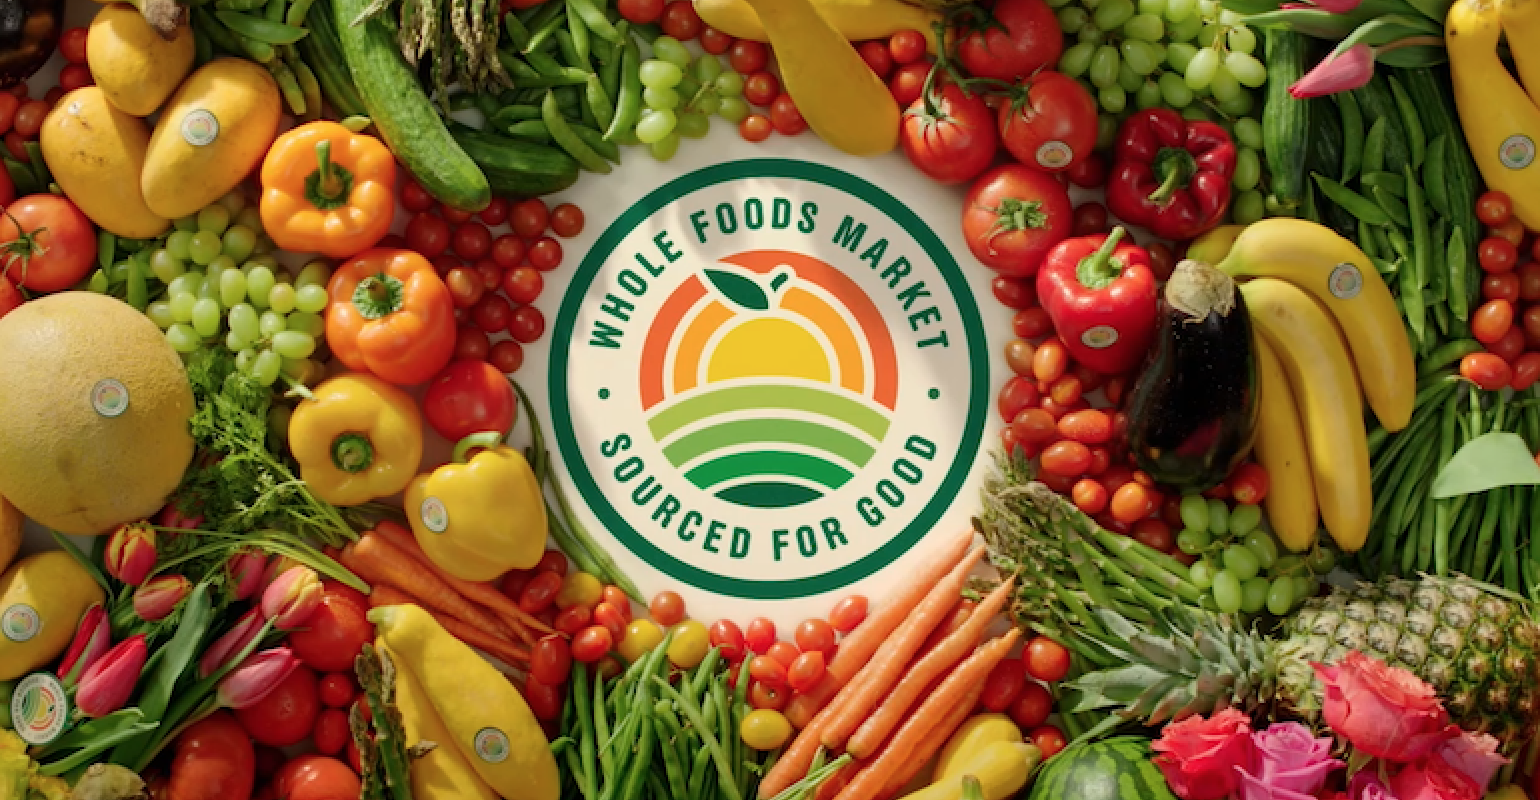 Food For All Market - SUSTAINABILITY